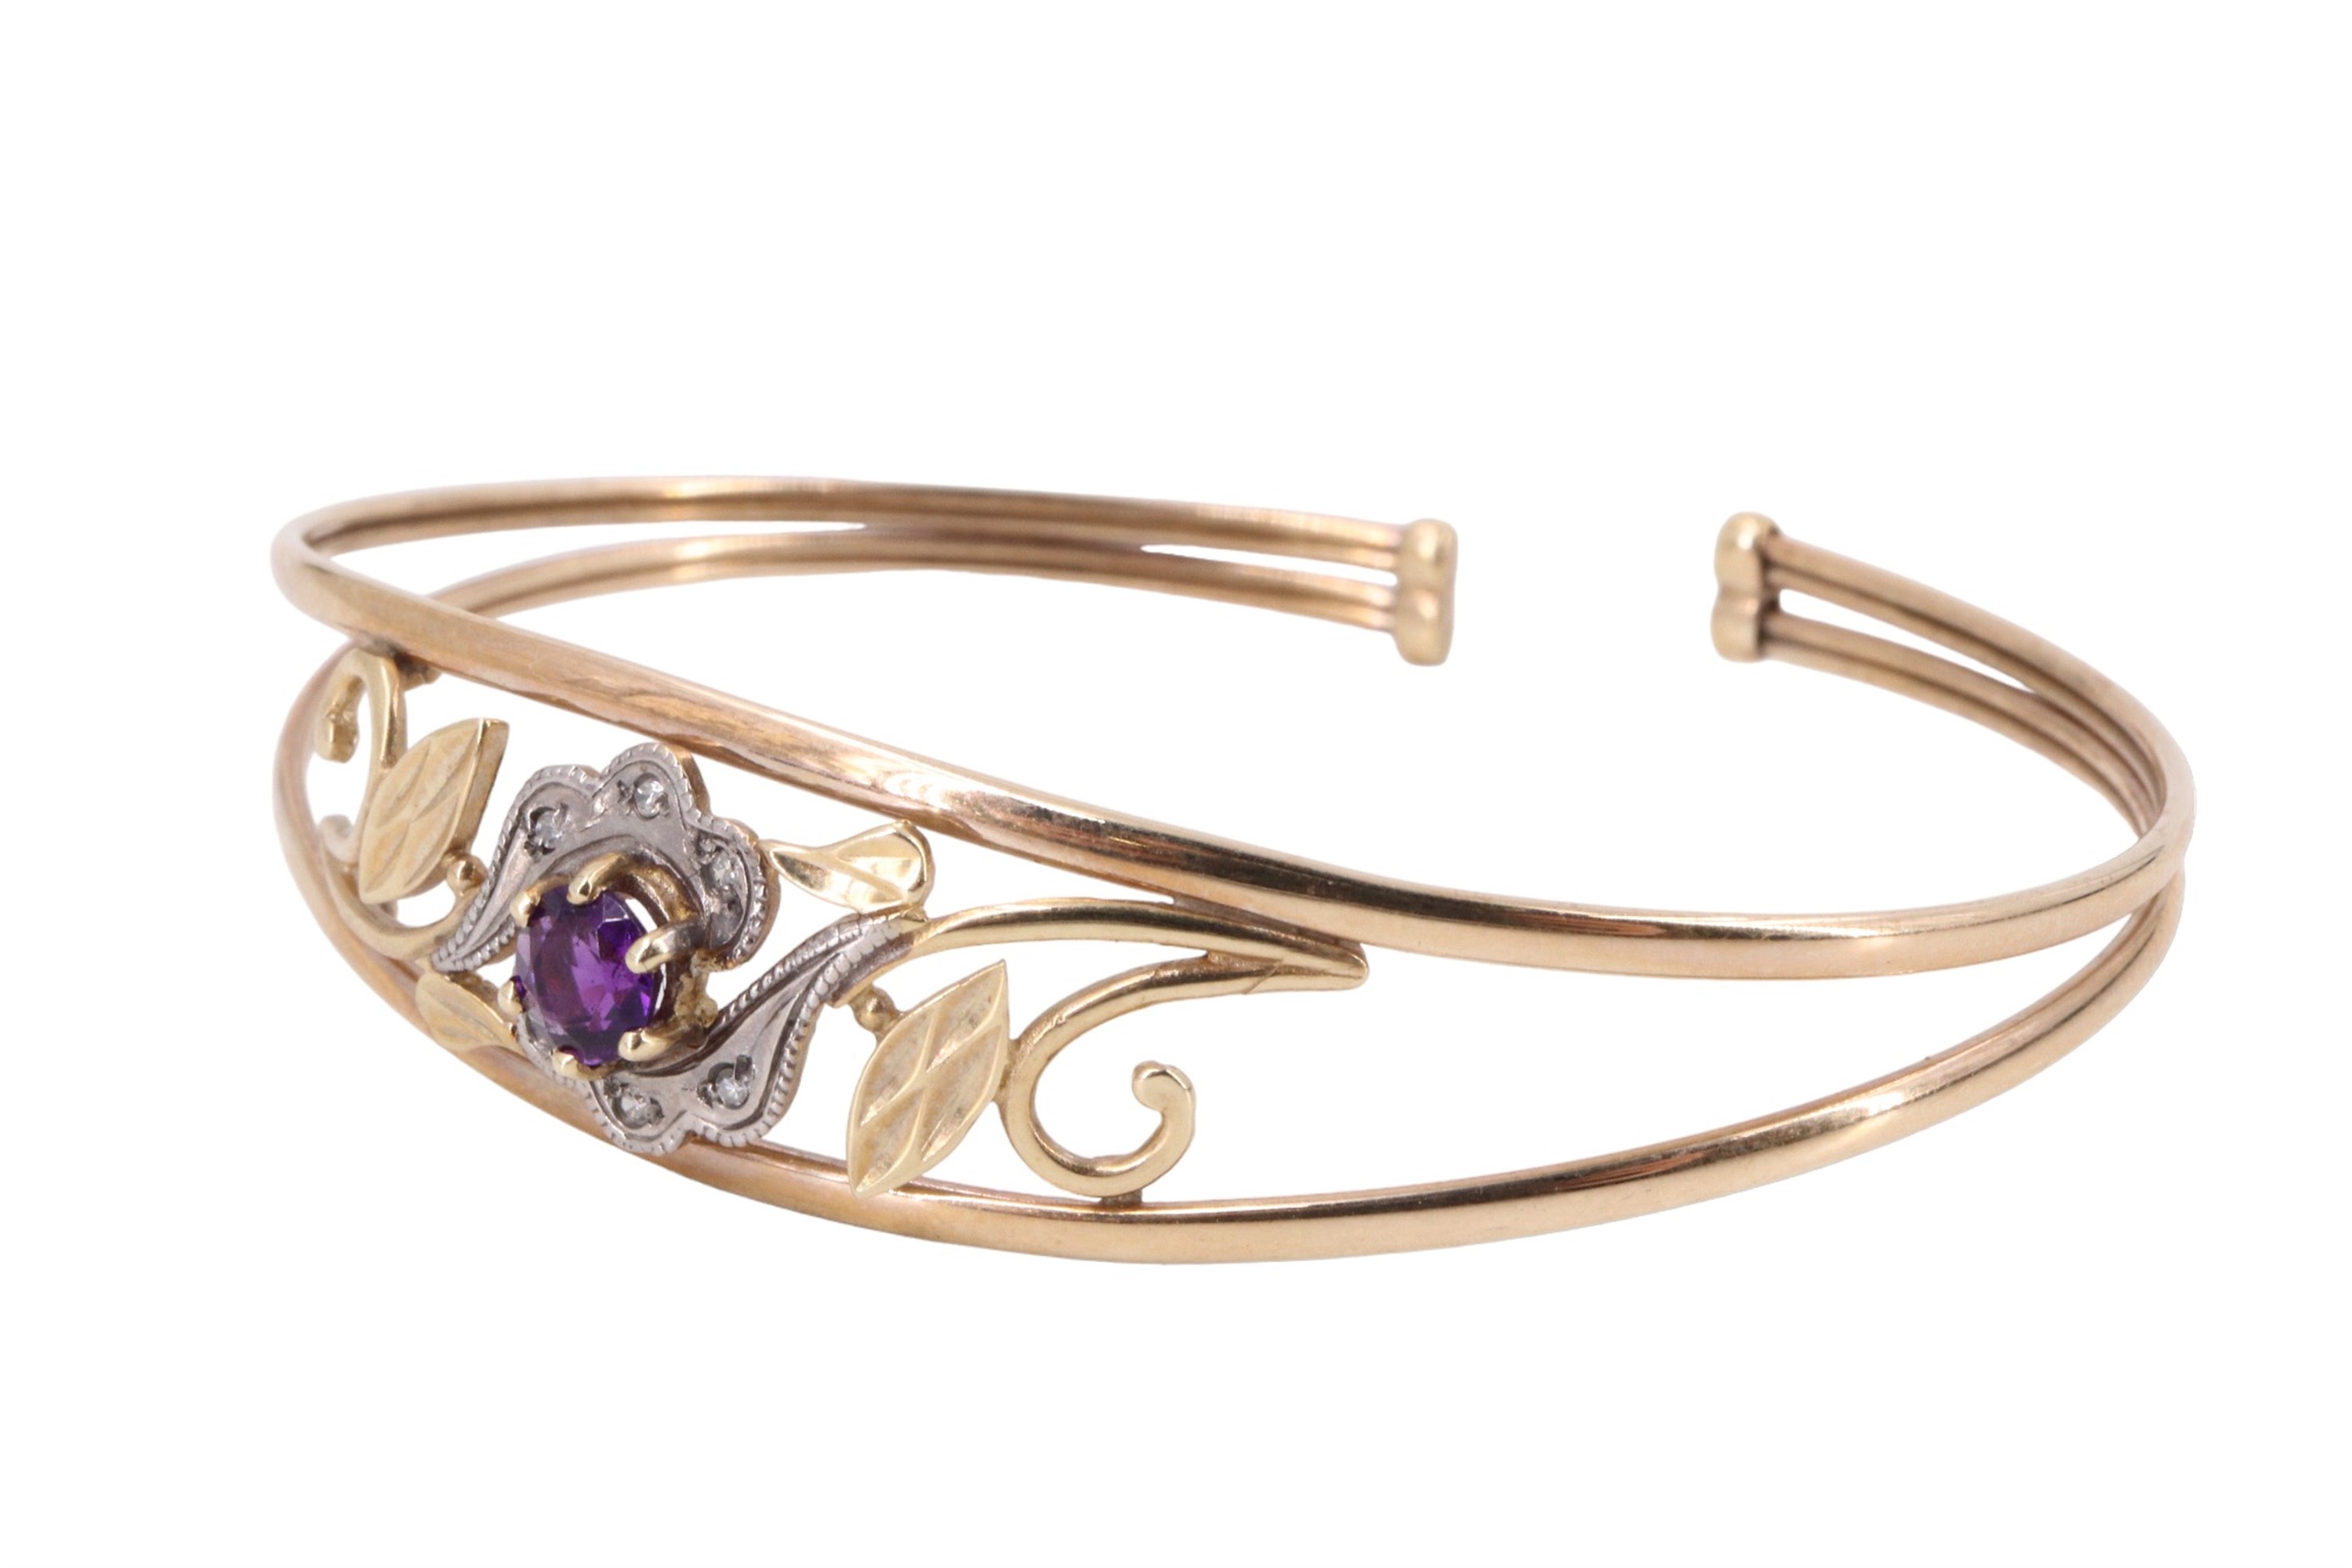 A contemporary amethyst and white stone set floral bangle, having a 5 mm amethyst brilliant